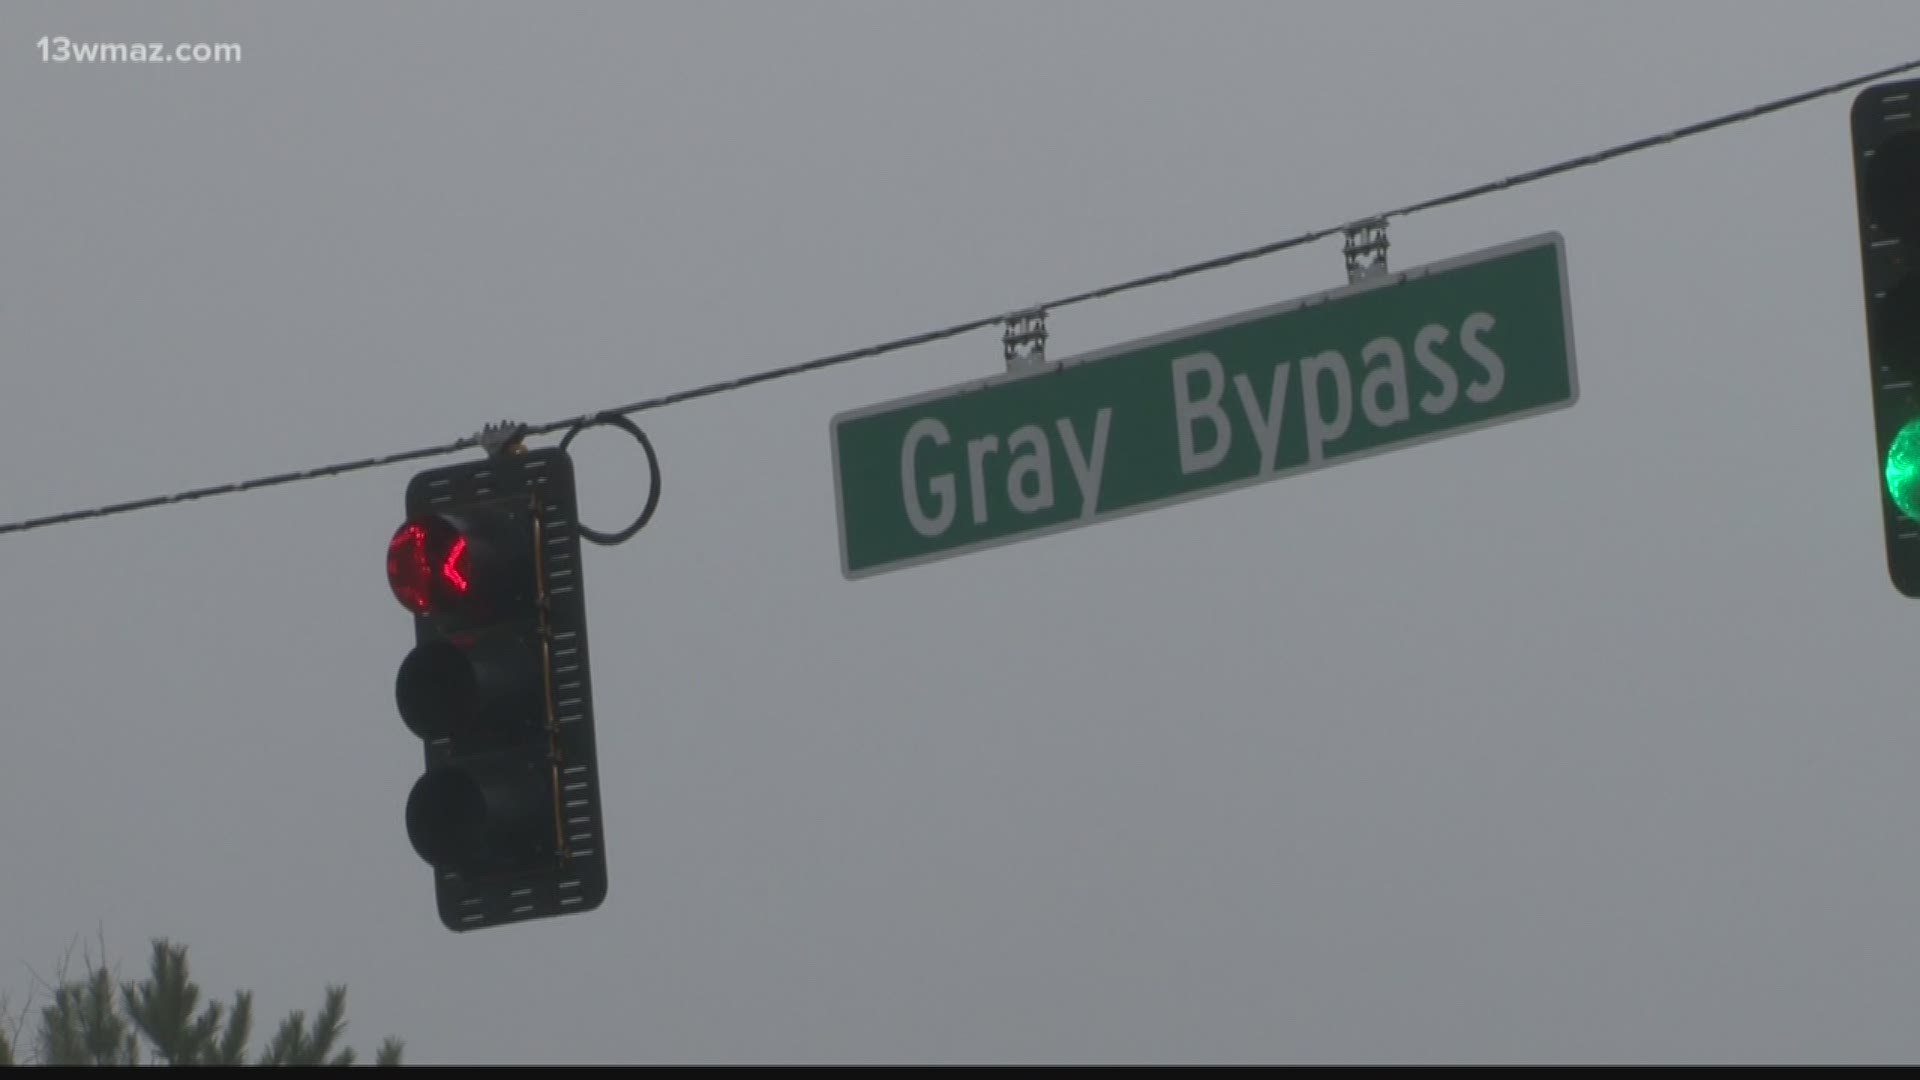 Lights to be installed at Gray Bypass